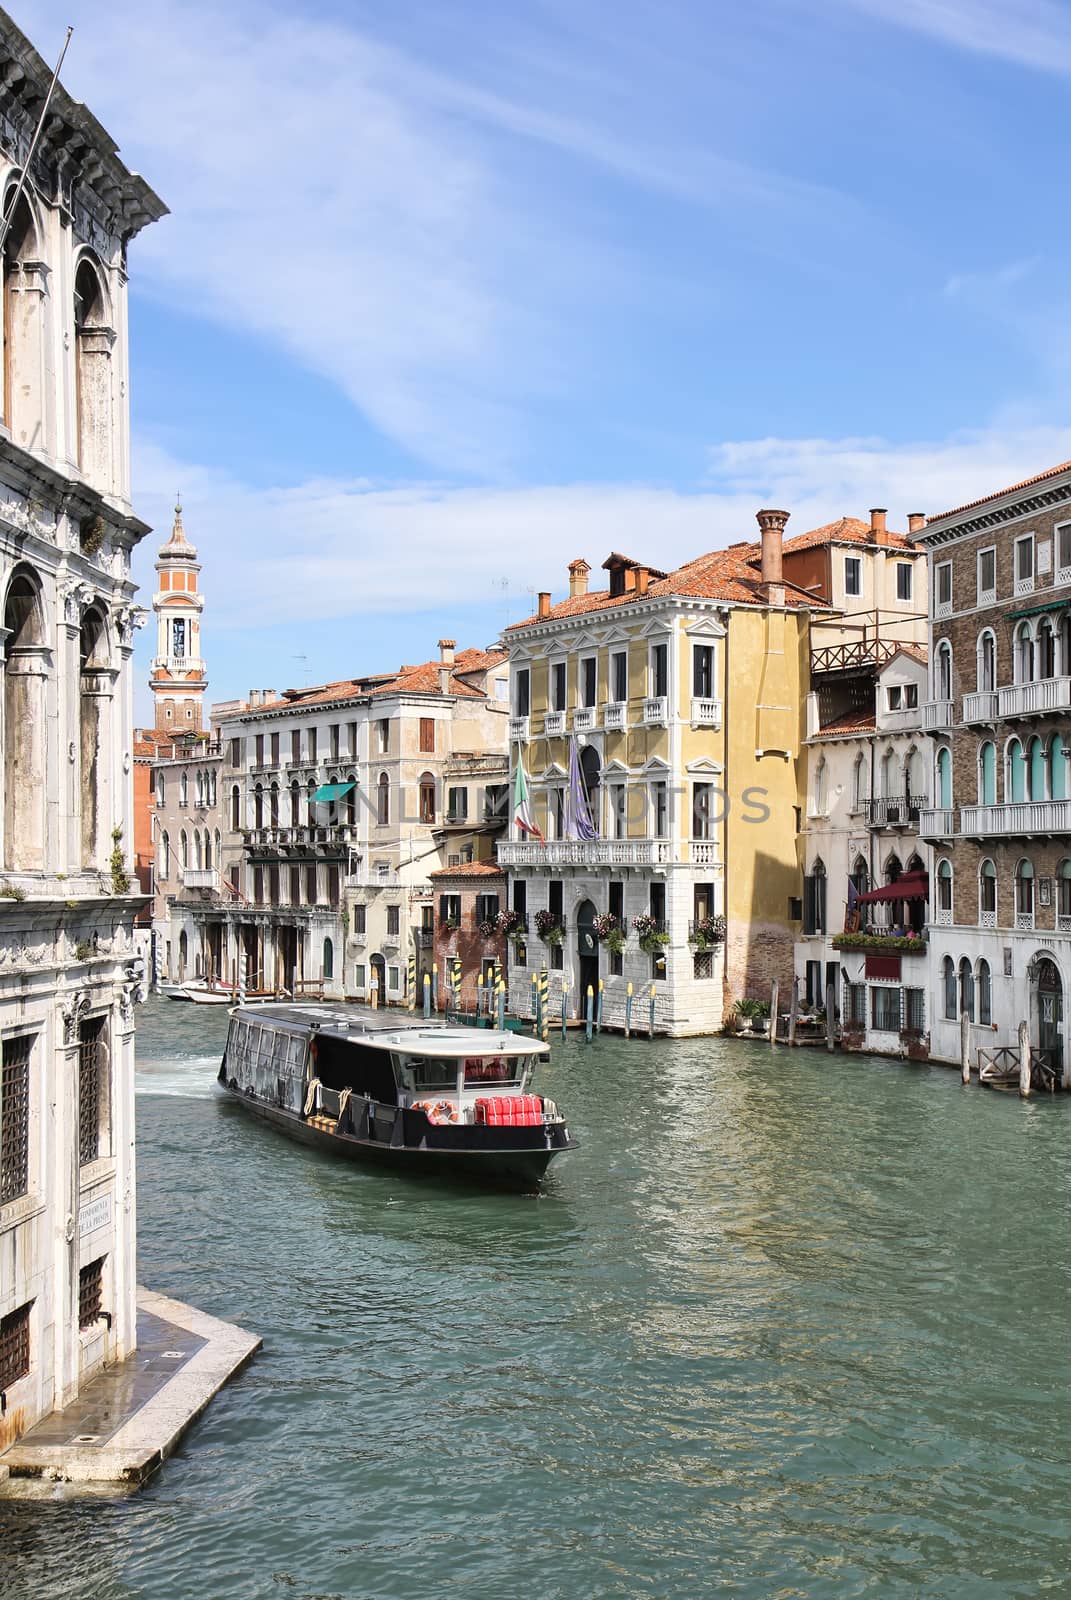 View of the Grand Canal, Italian palaces and a waterbus from Ponte di Rialto or Rialto Bridge in Venice, Italy.